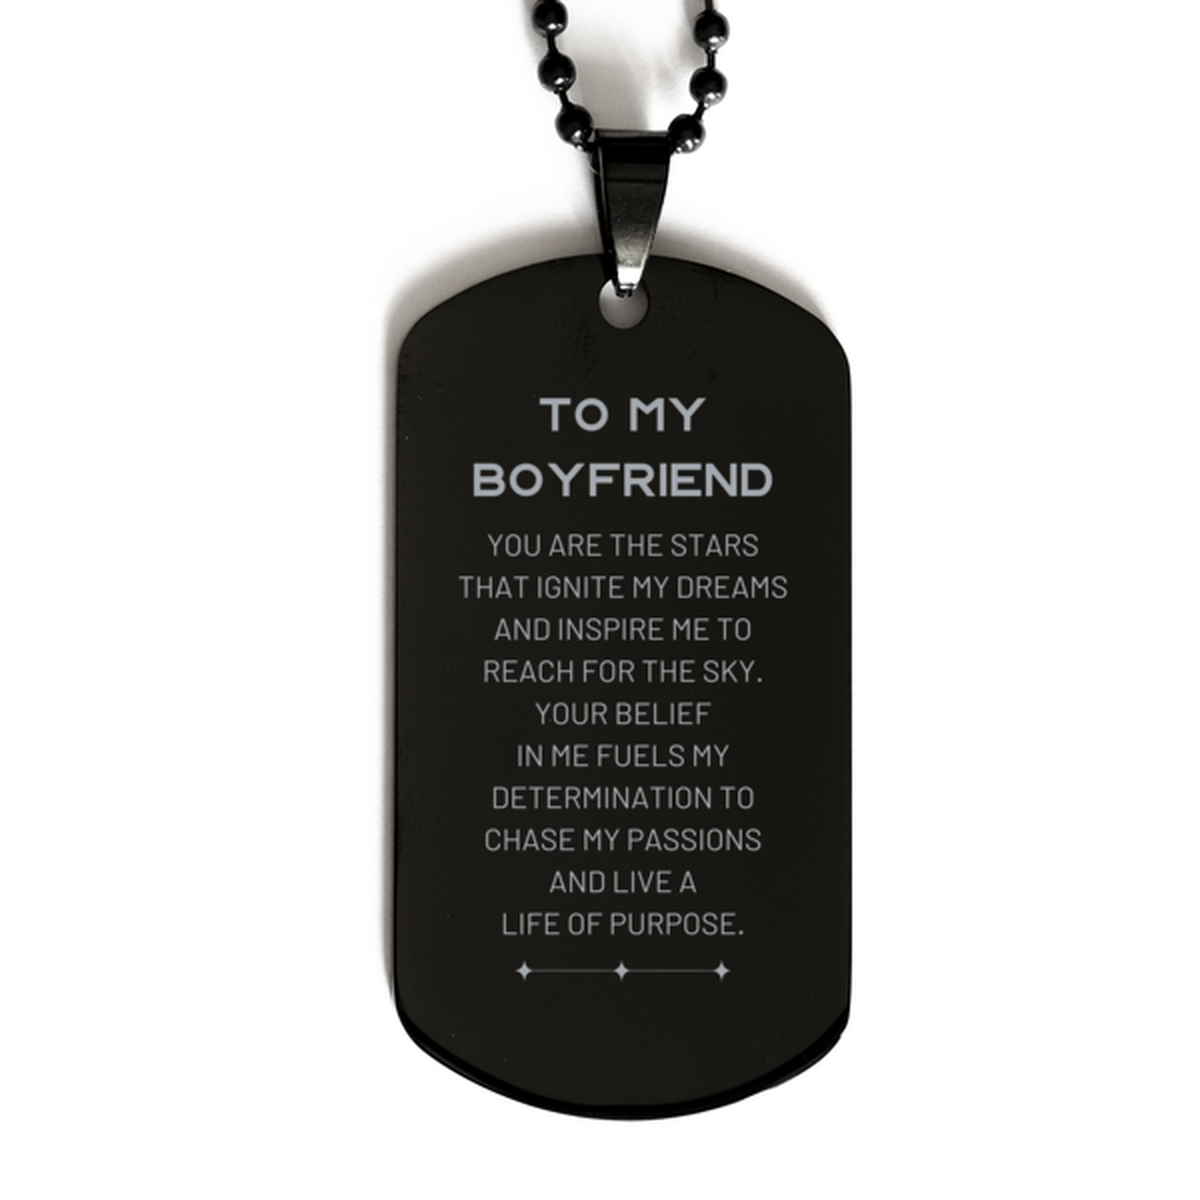 To My Boyfriend Black Dog Tag, You are the stars that ignite my dreams and inspire me to reach for the sky, Birthday Unique Gifts For Boyfriend, Thank You Gifts For Boyfriend